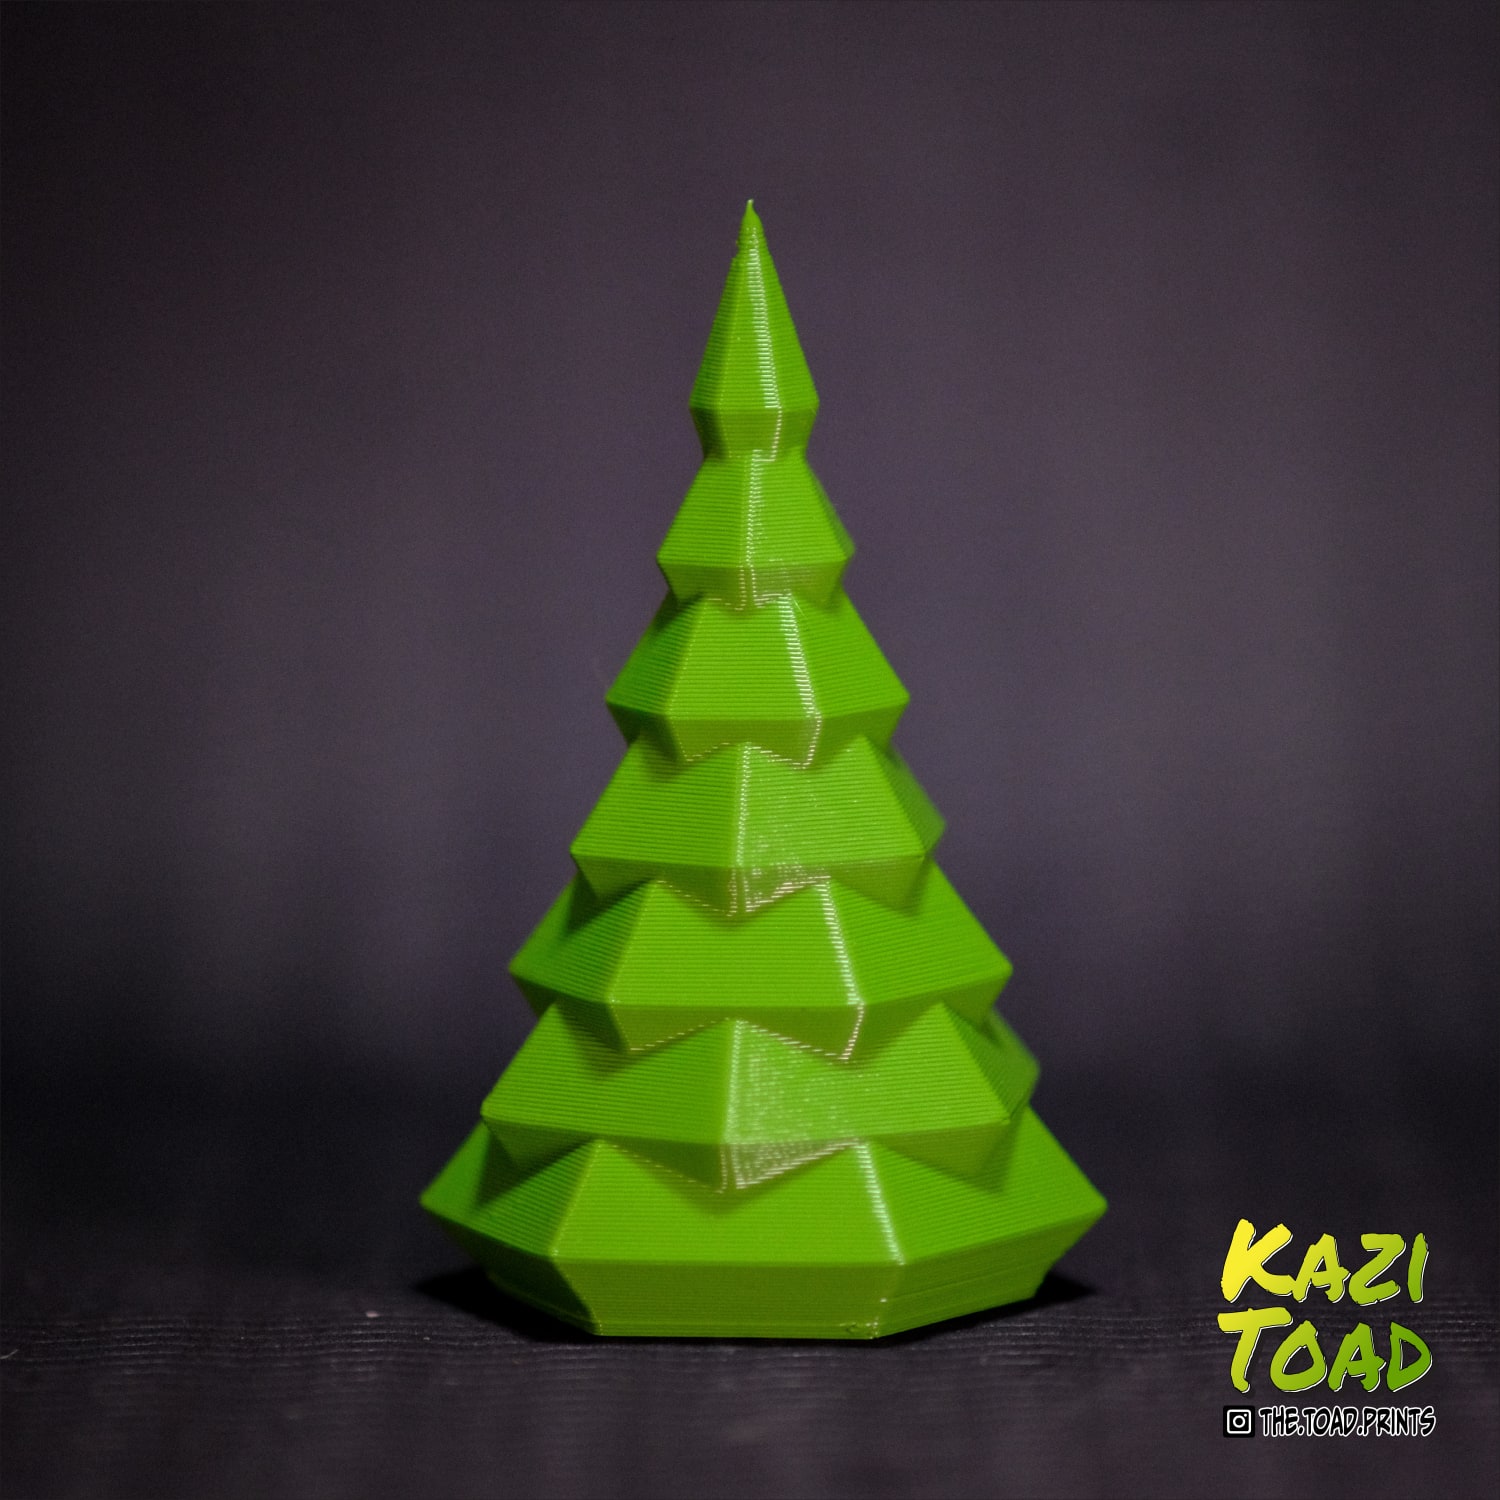 Vase mode Christmas Tree, prints in 25 min for your last minute holiday decorations :)